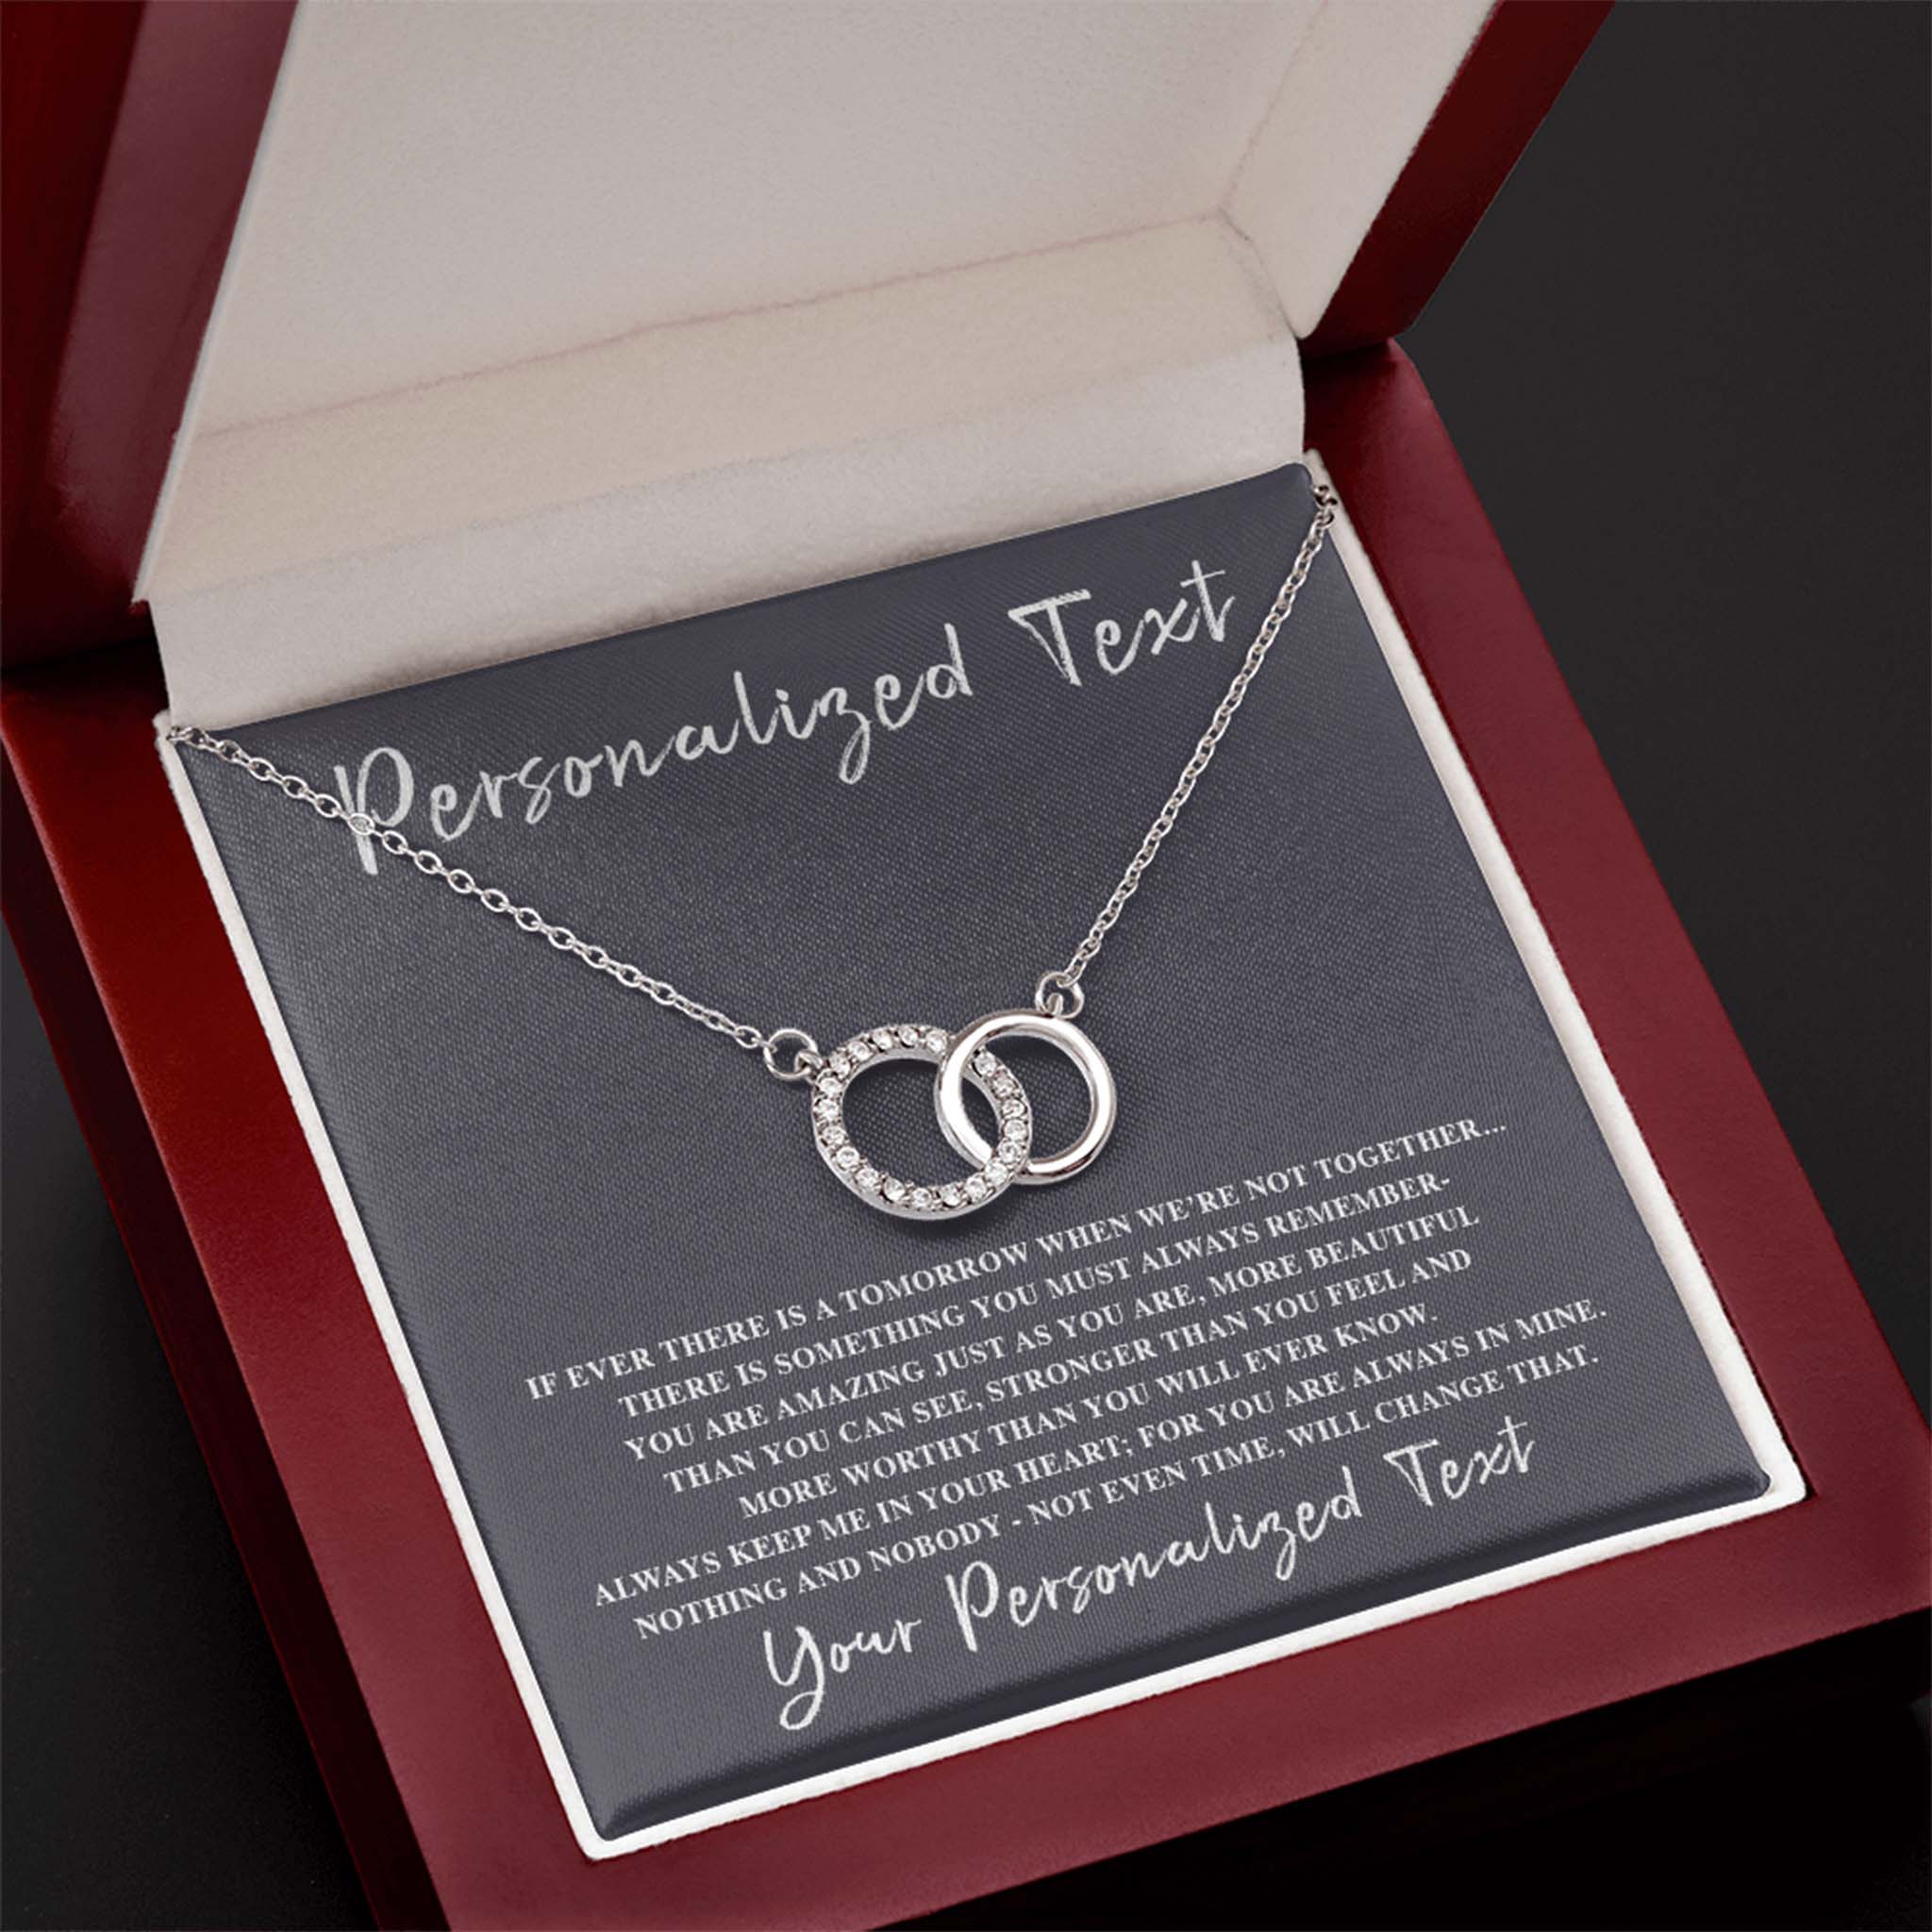 Perfect Pair Necklace If Ever There Is a Tomorrow -Love Personalized Insert CardCustomly Gifts